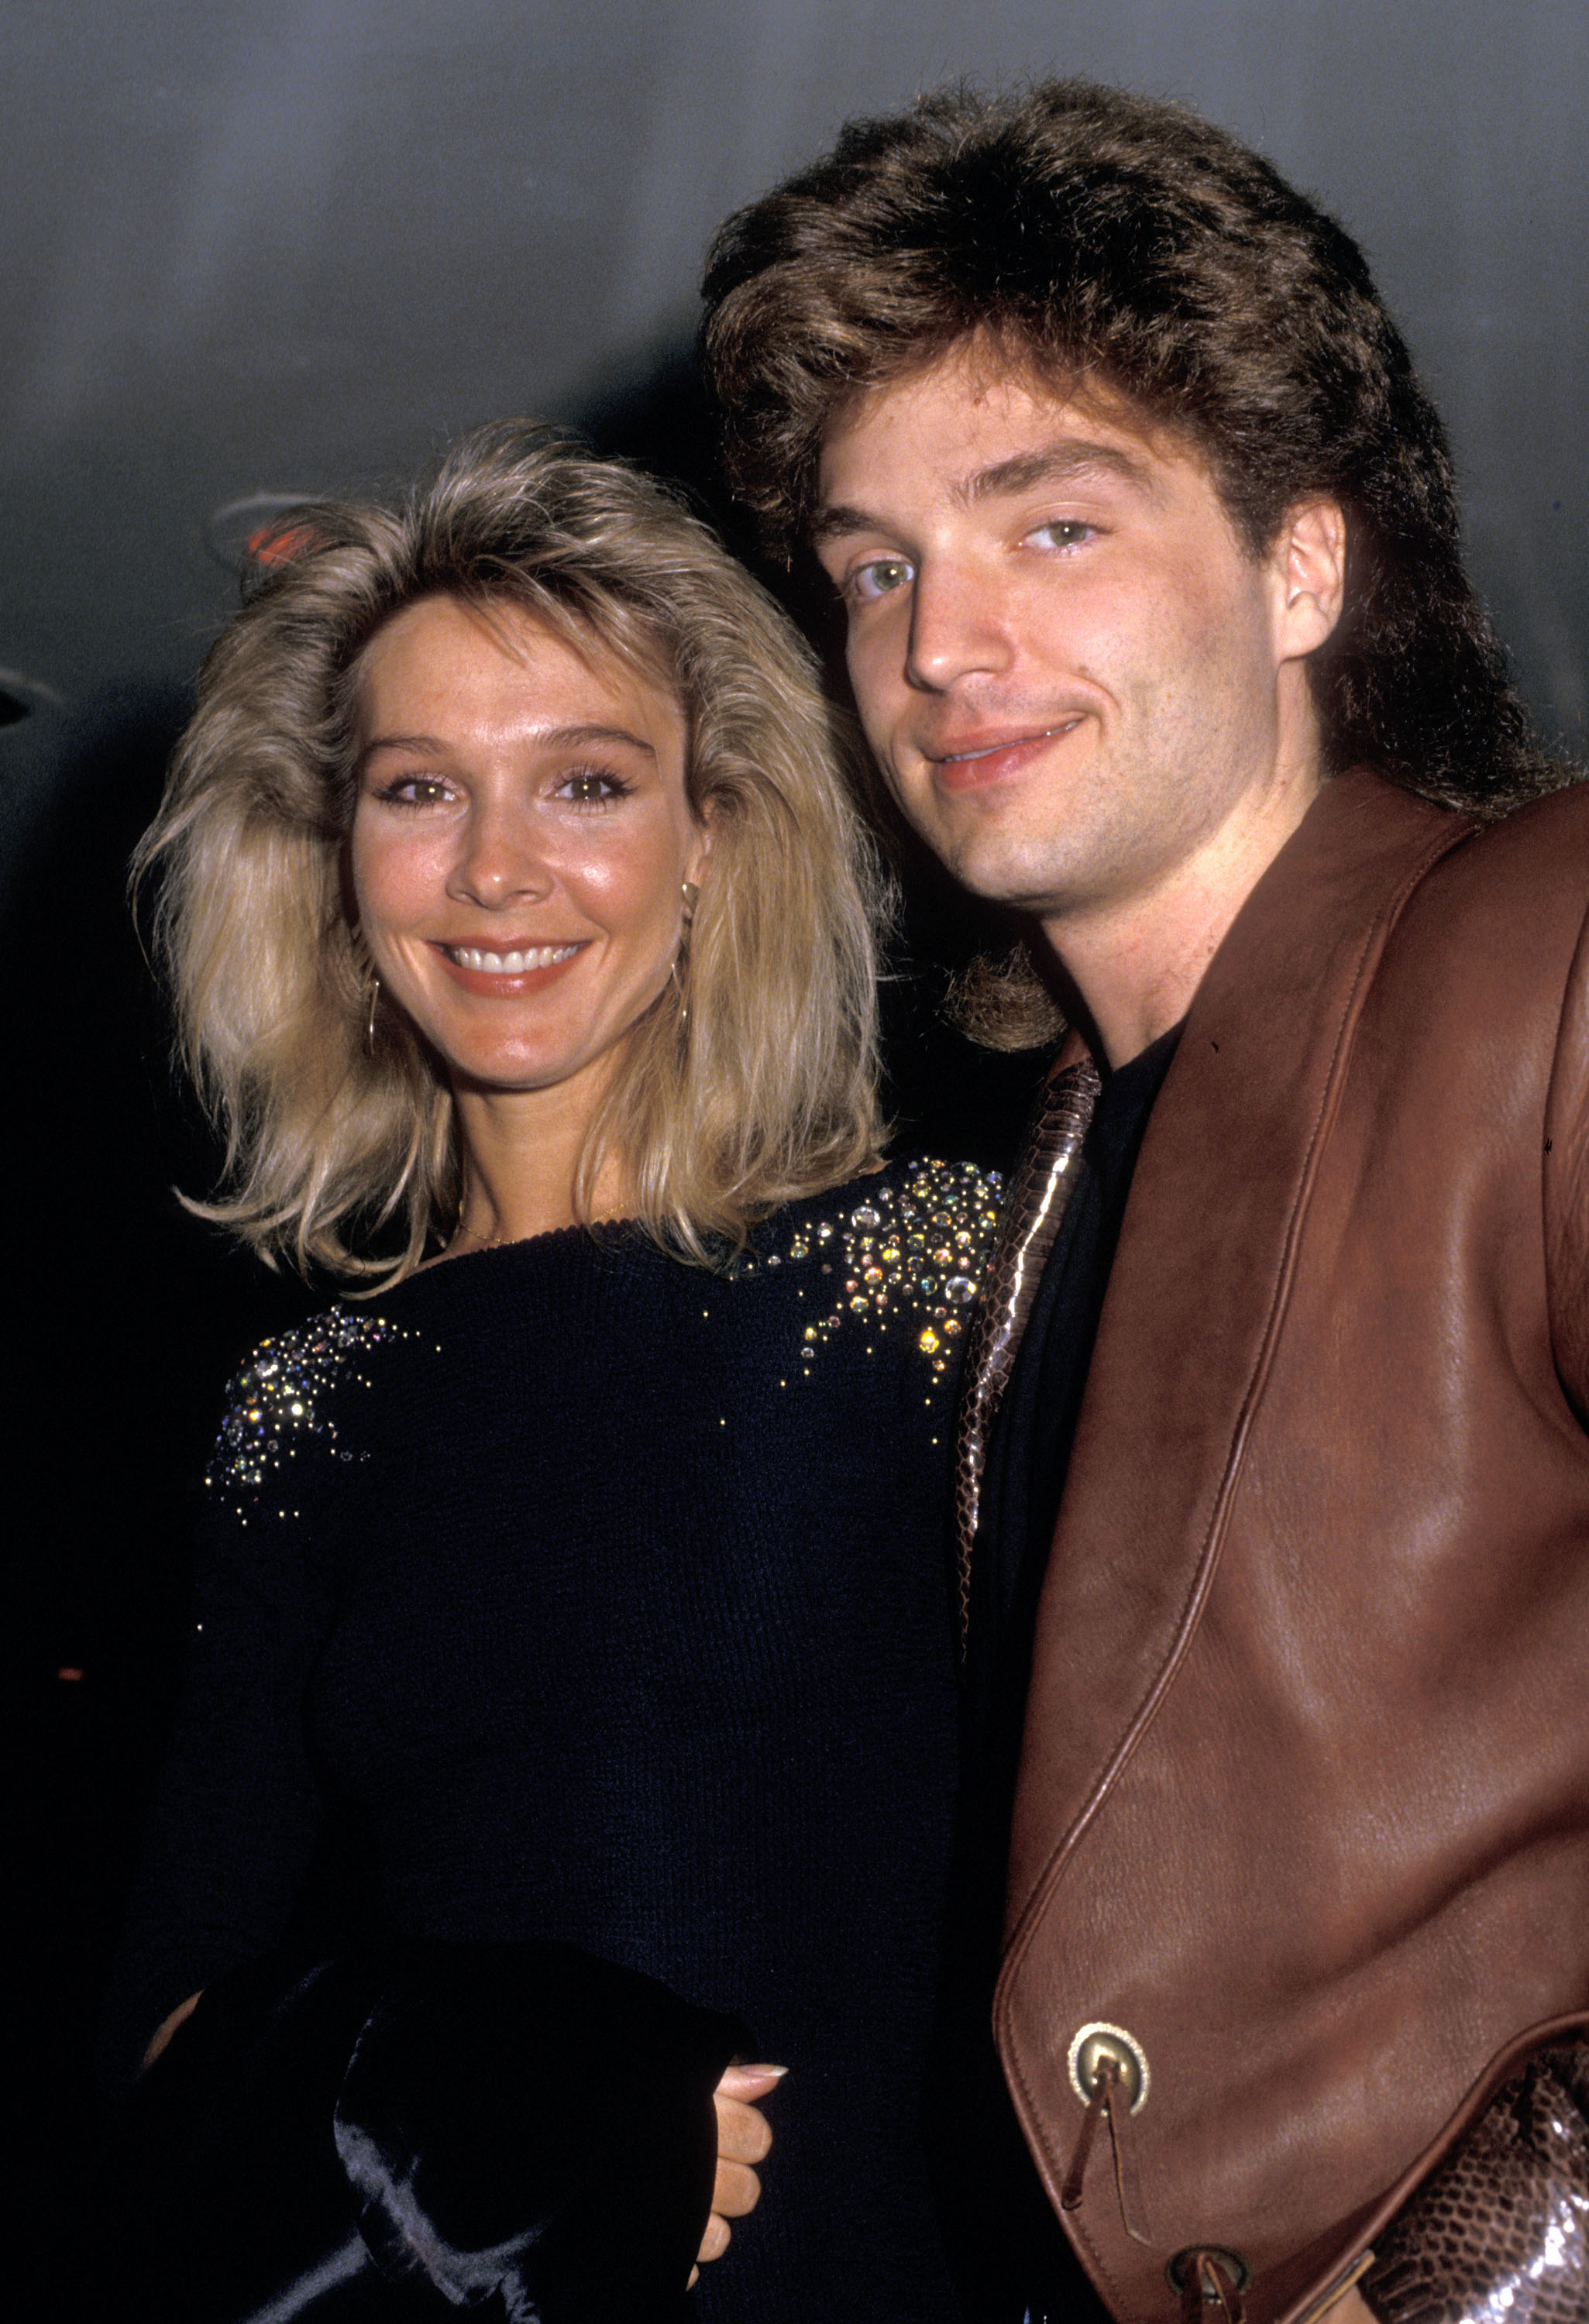 Cynthia Rhodes and Richard Marx in August 1987 in New York City. | Source: Getty Images